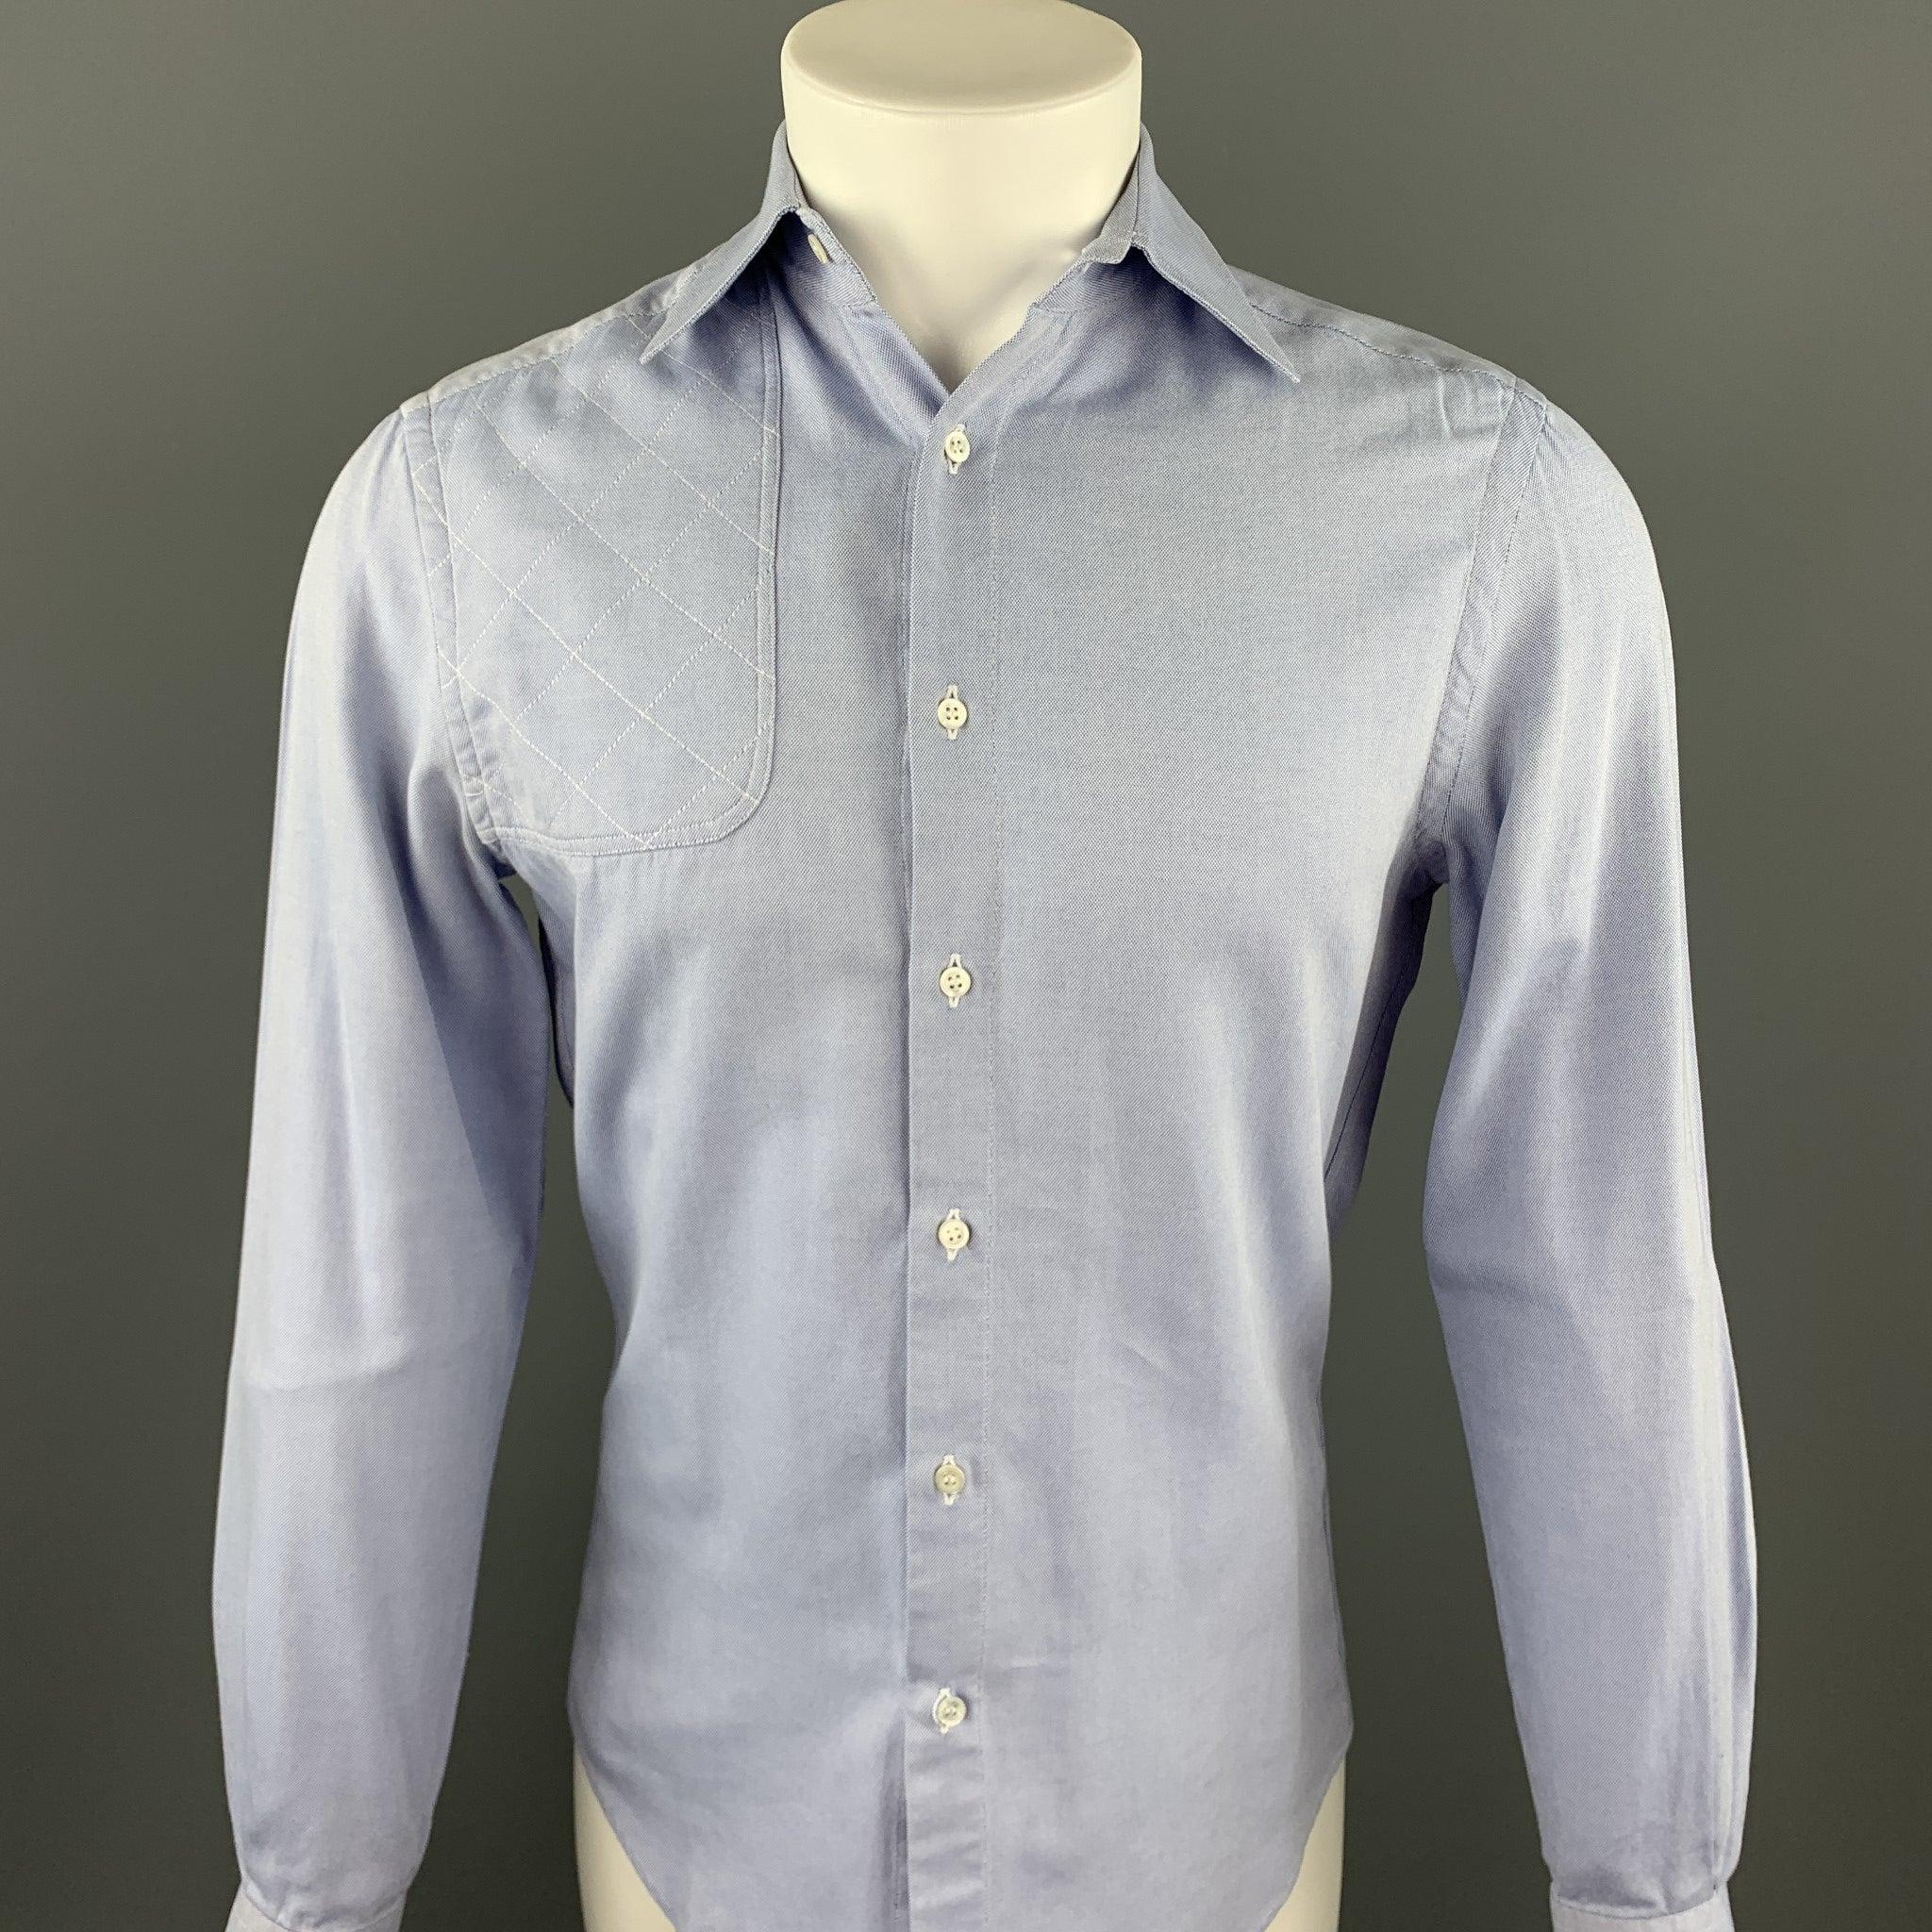 MICHAEL BASTIAN long sleeve shirt comes in a light blue cotton featuring a button up style, quilted patch, and a spread collar. Made in USA.Excellent
Pre-Owned Condition. 

Marked:   15/38 

Measurements: 
 
Shoulder: 17 inches 
Chest: 38 inches